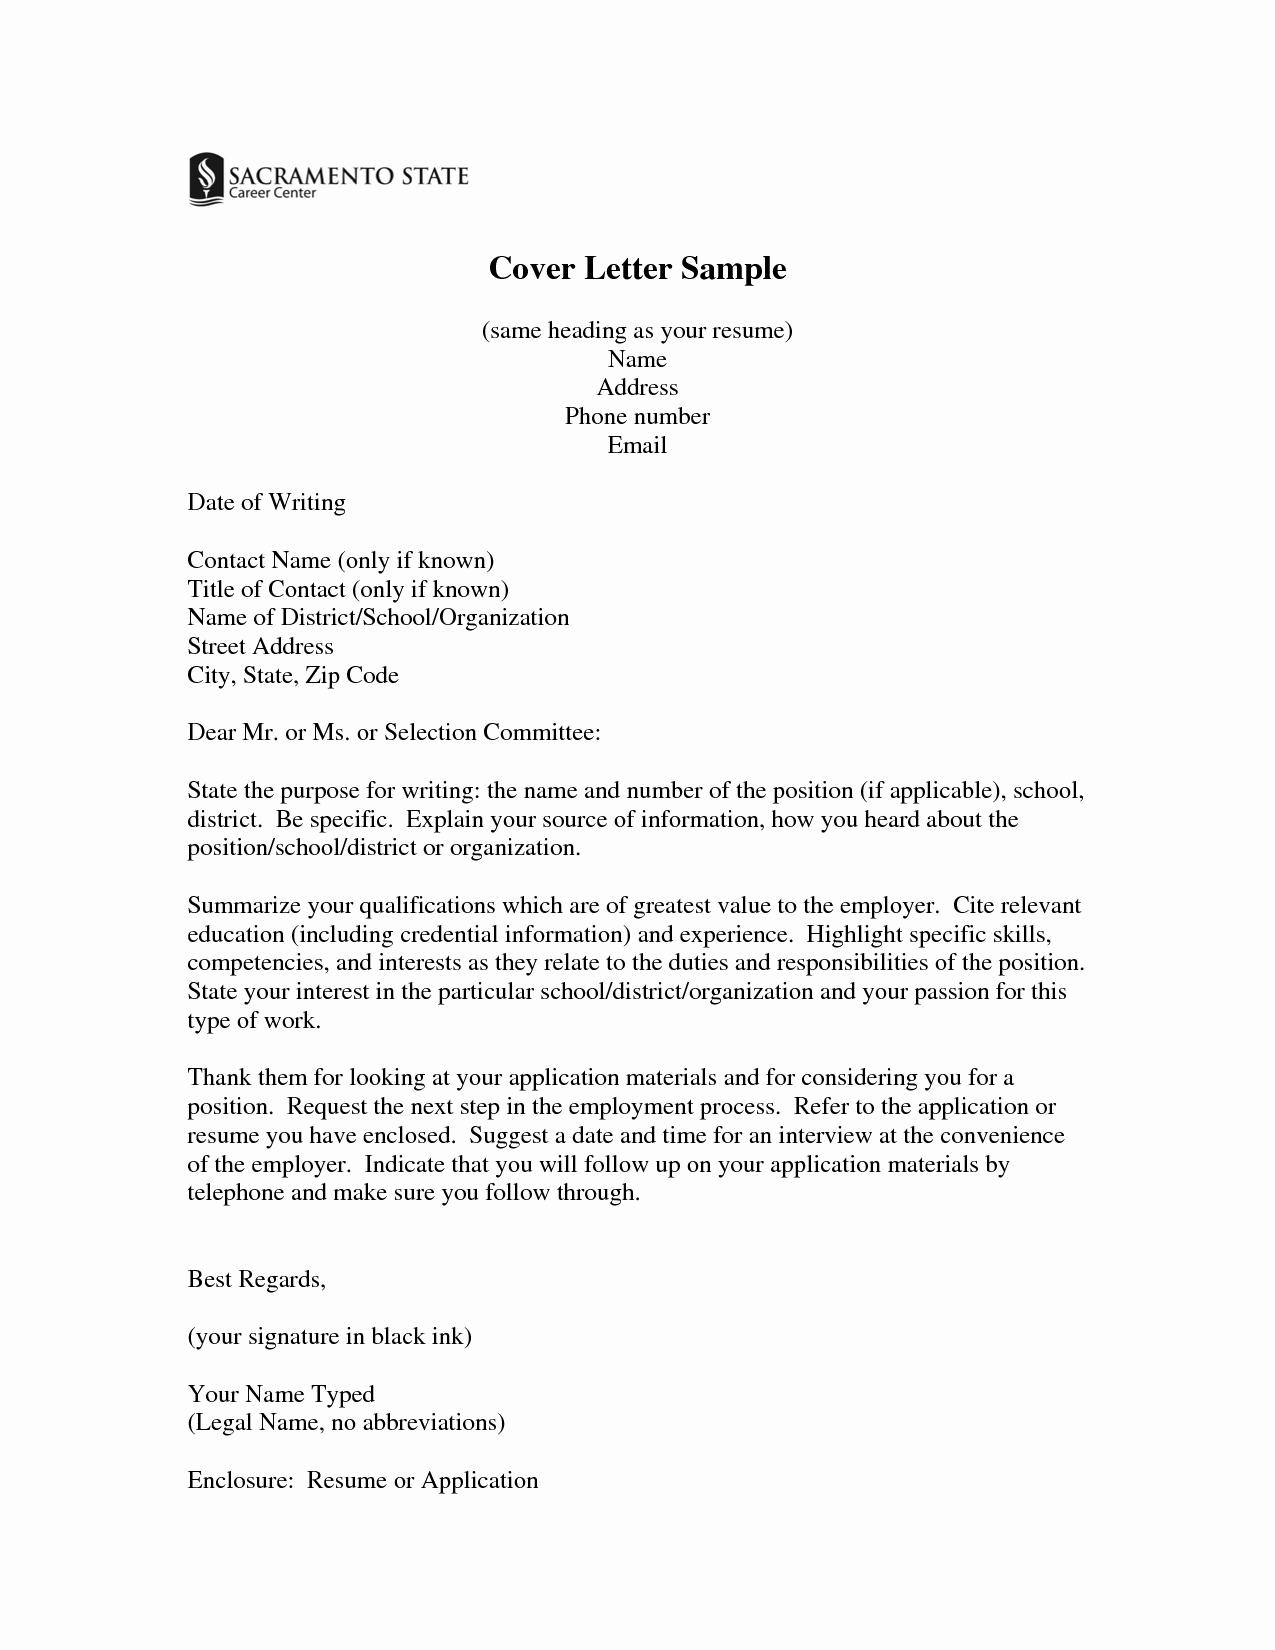 Resume and Cover Letter Template Luxury Same Cover Letters for Resume